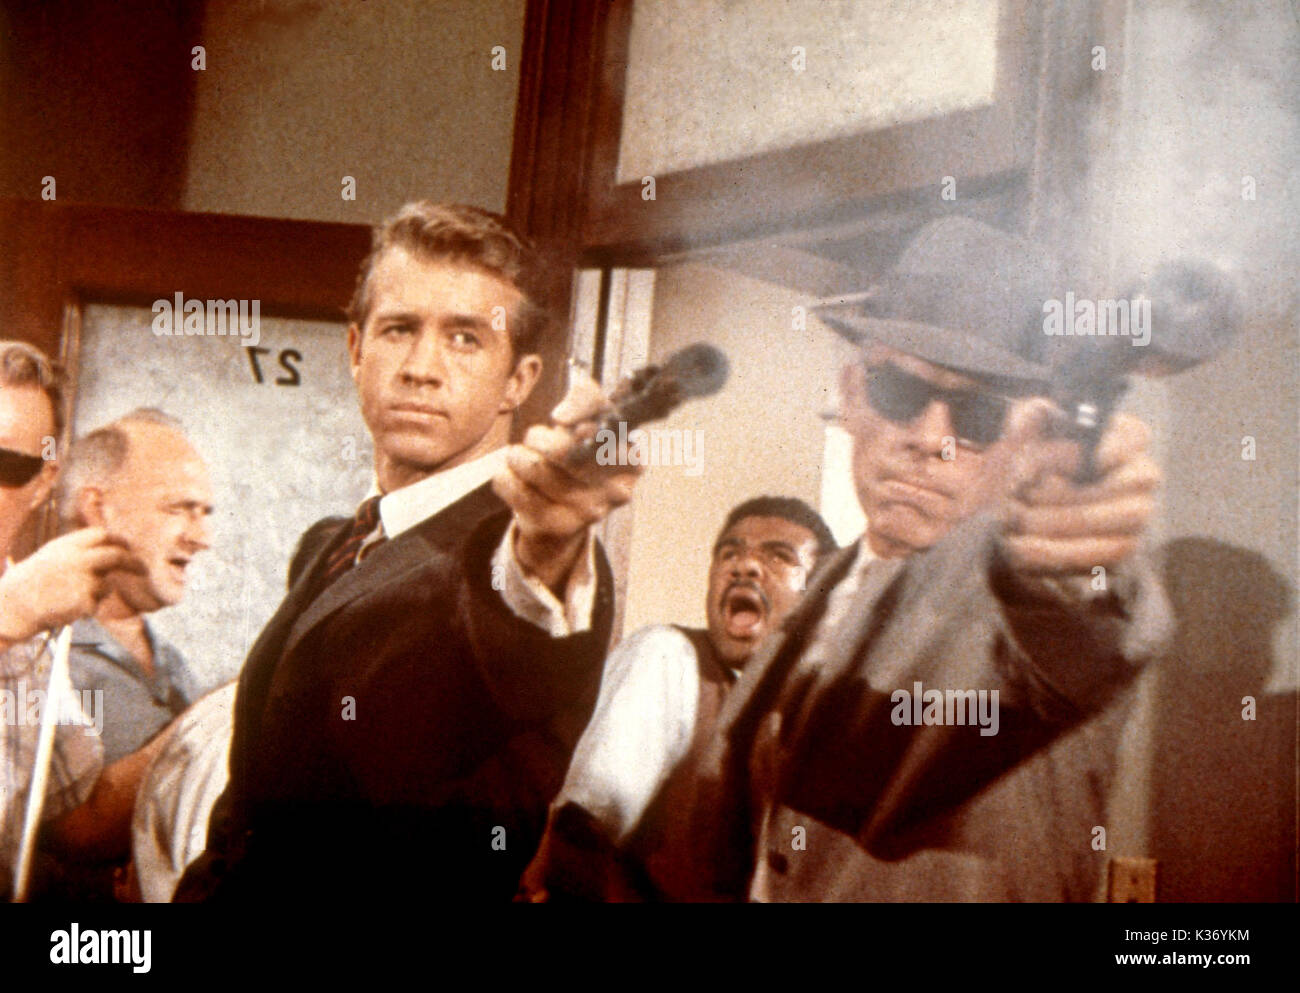 THE KILLERS CLU GULAGER, LEE MARVIN     Date: 1964 Stock Photo